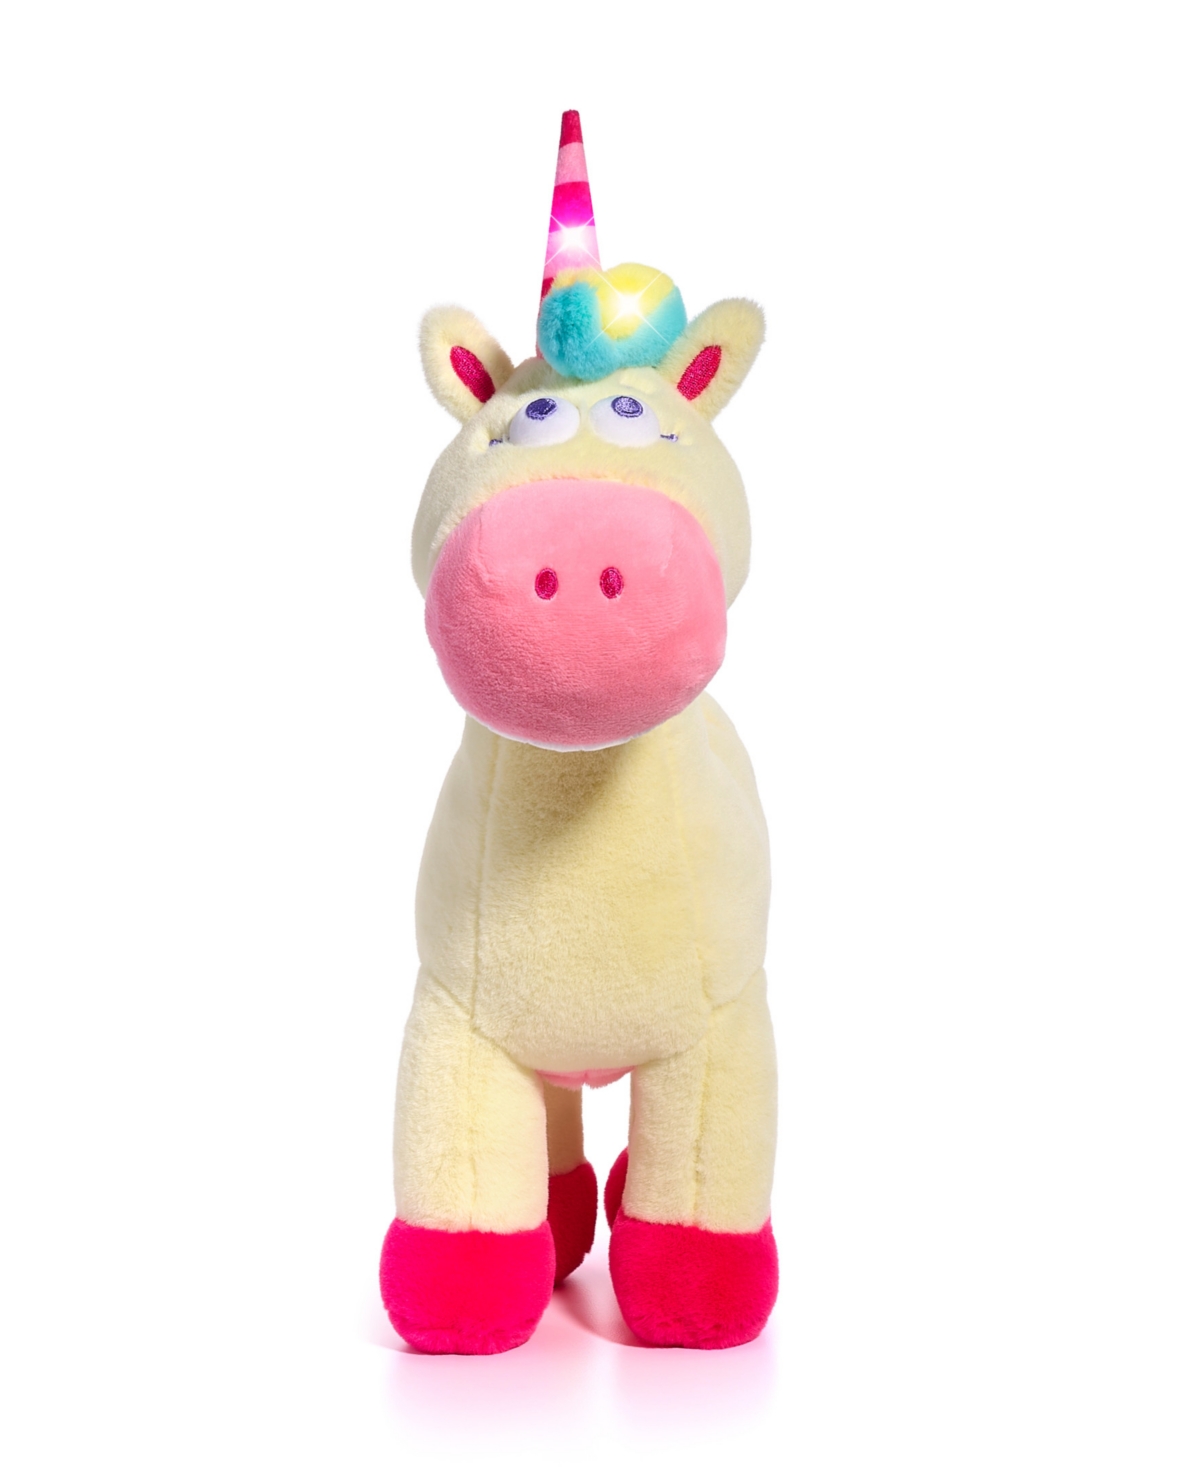 Geoffrey's Toy Box Kids' 14" Glow Brights Toy Plush Led With Sound Unicorn, Created For Macys In Pastel Pink